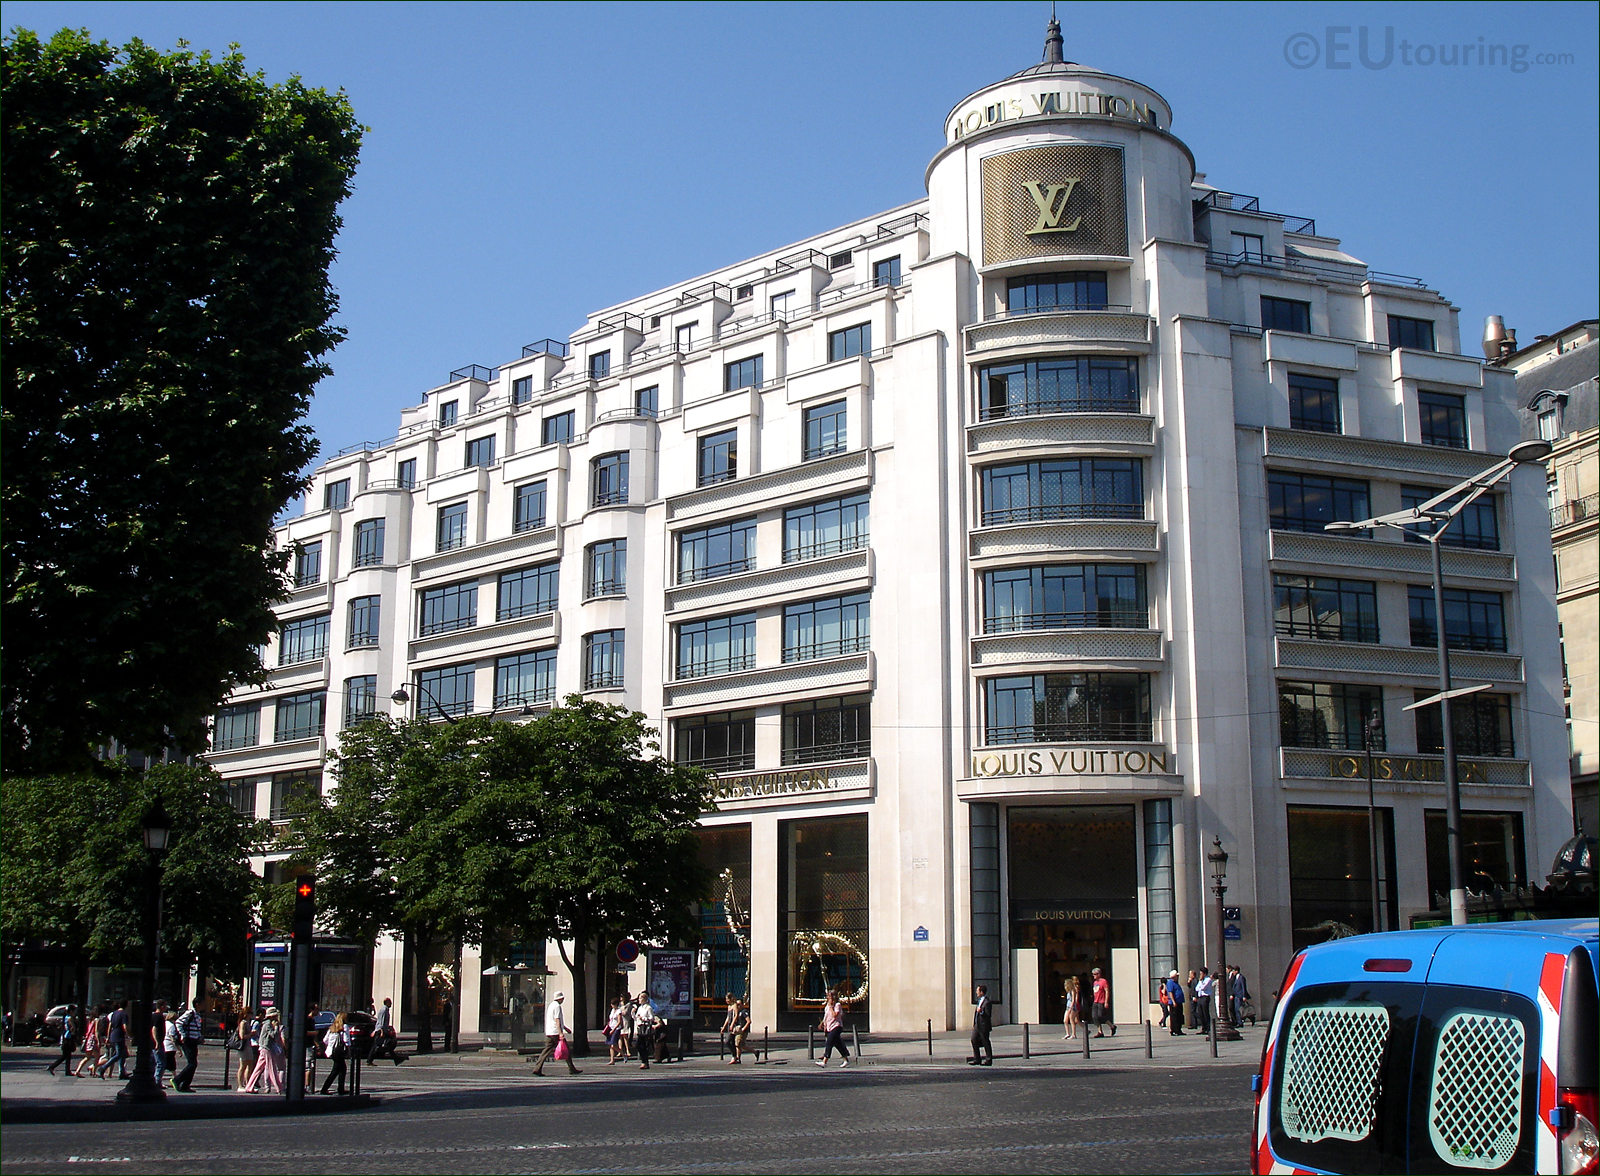 Street view of Champs-Elysees Avenue with building LOUIS VUITTON